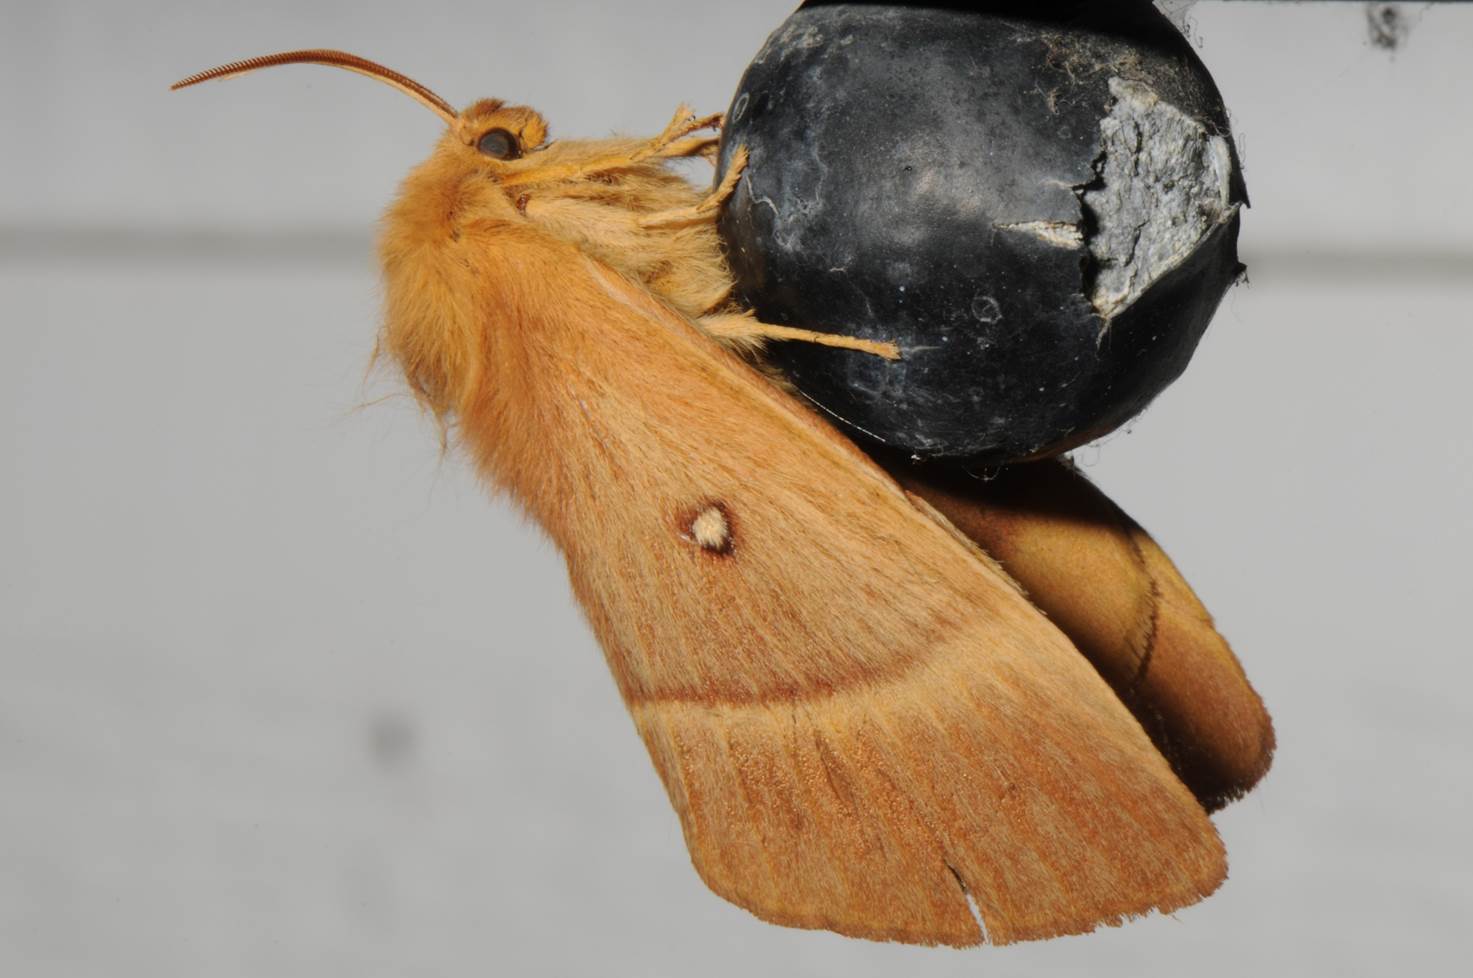 A moth on a black object

Description automatically generated